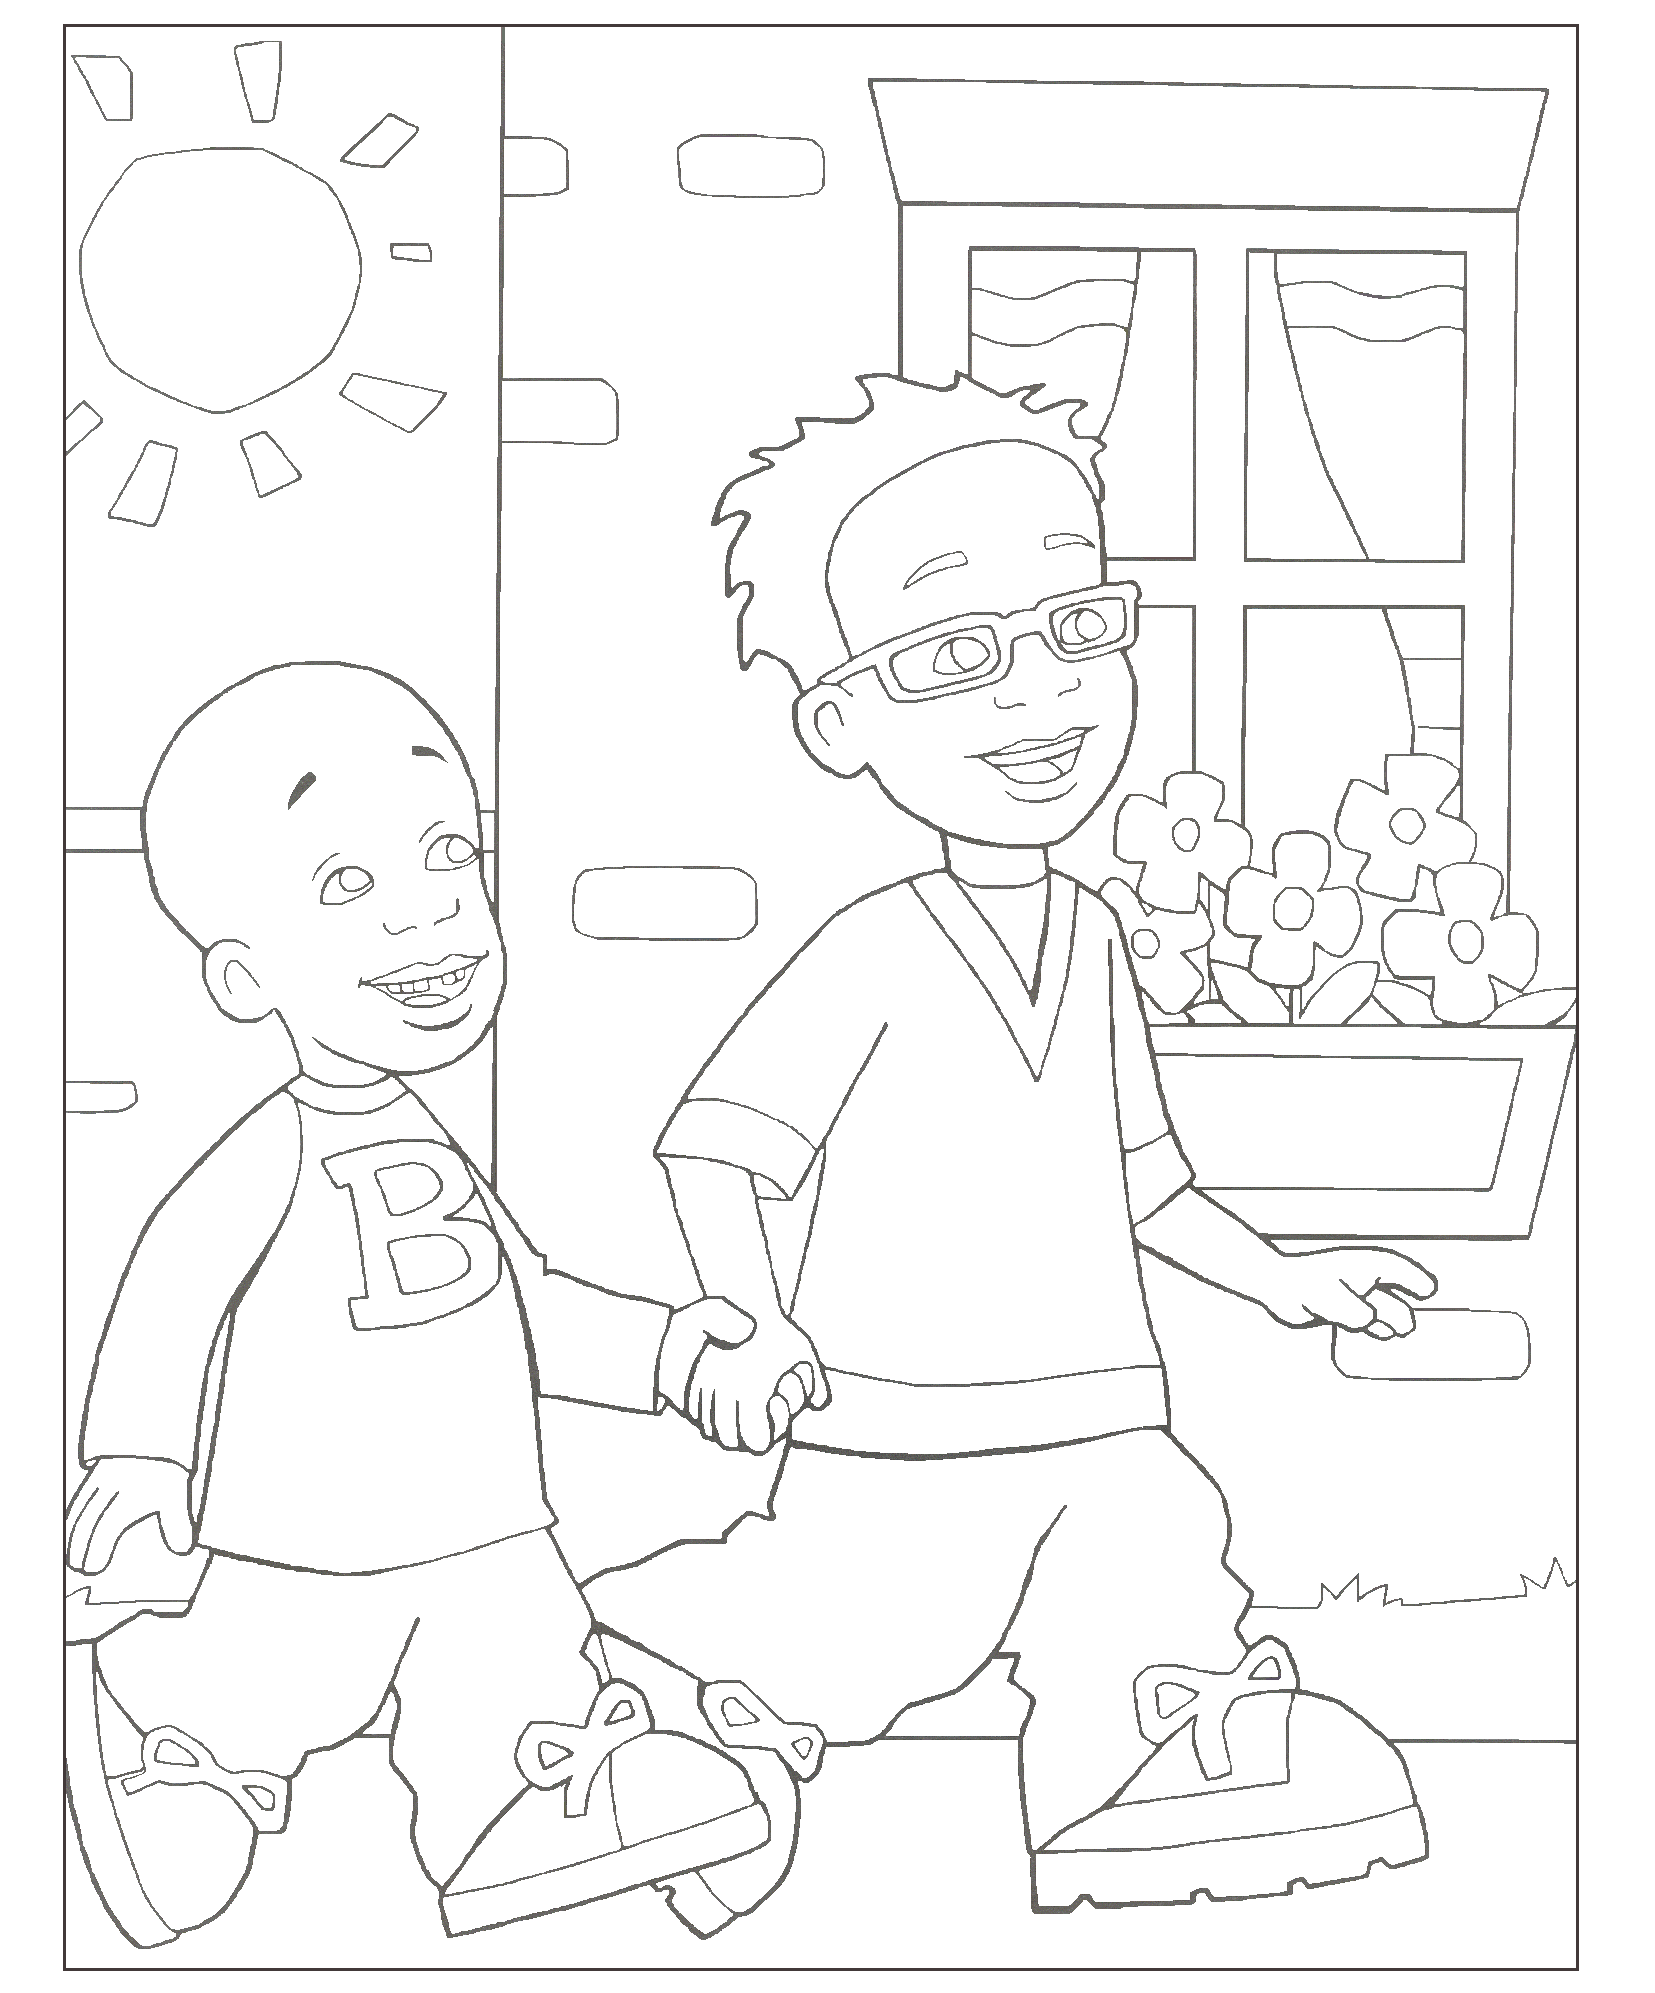 Little Bill - Coloring Pages for Kids and for Adults